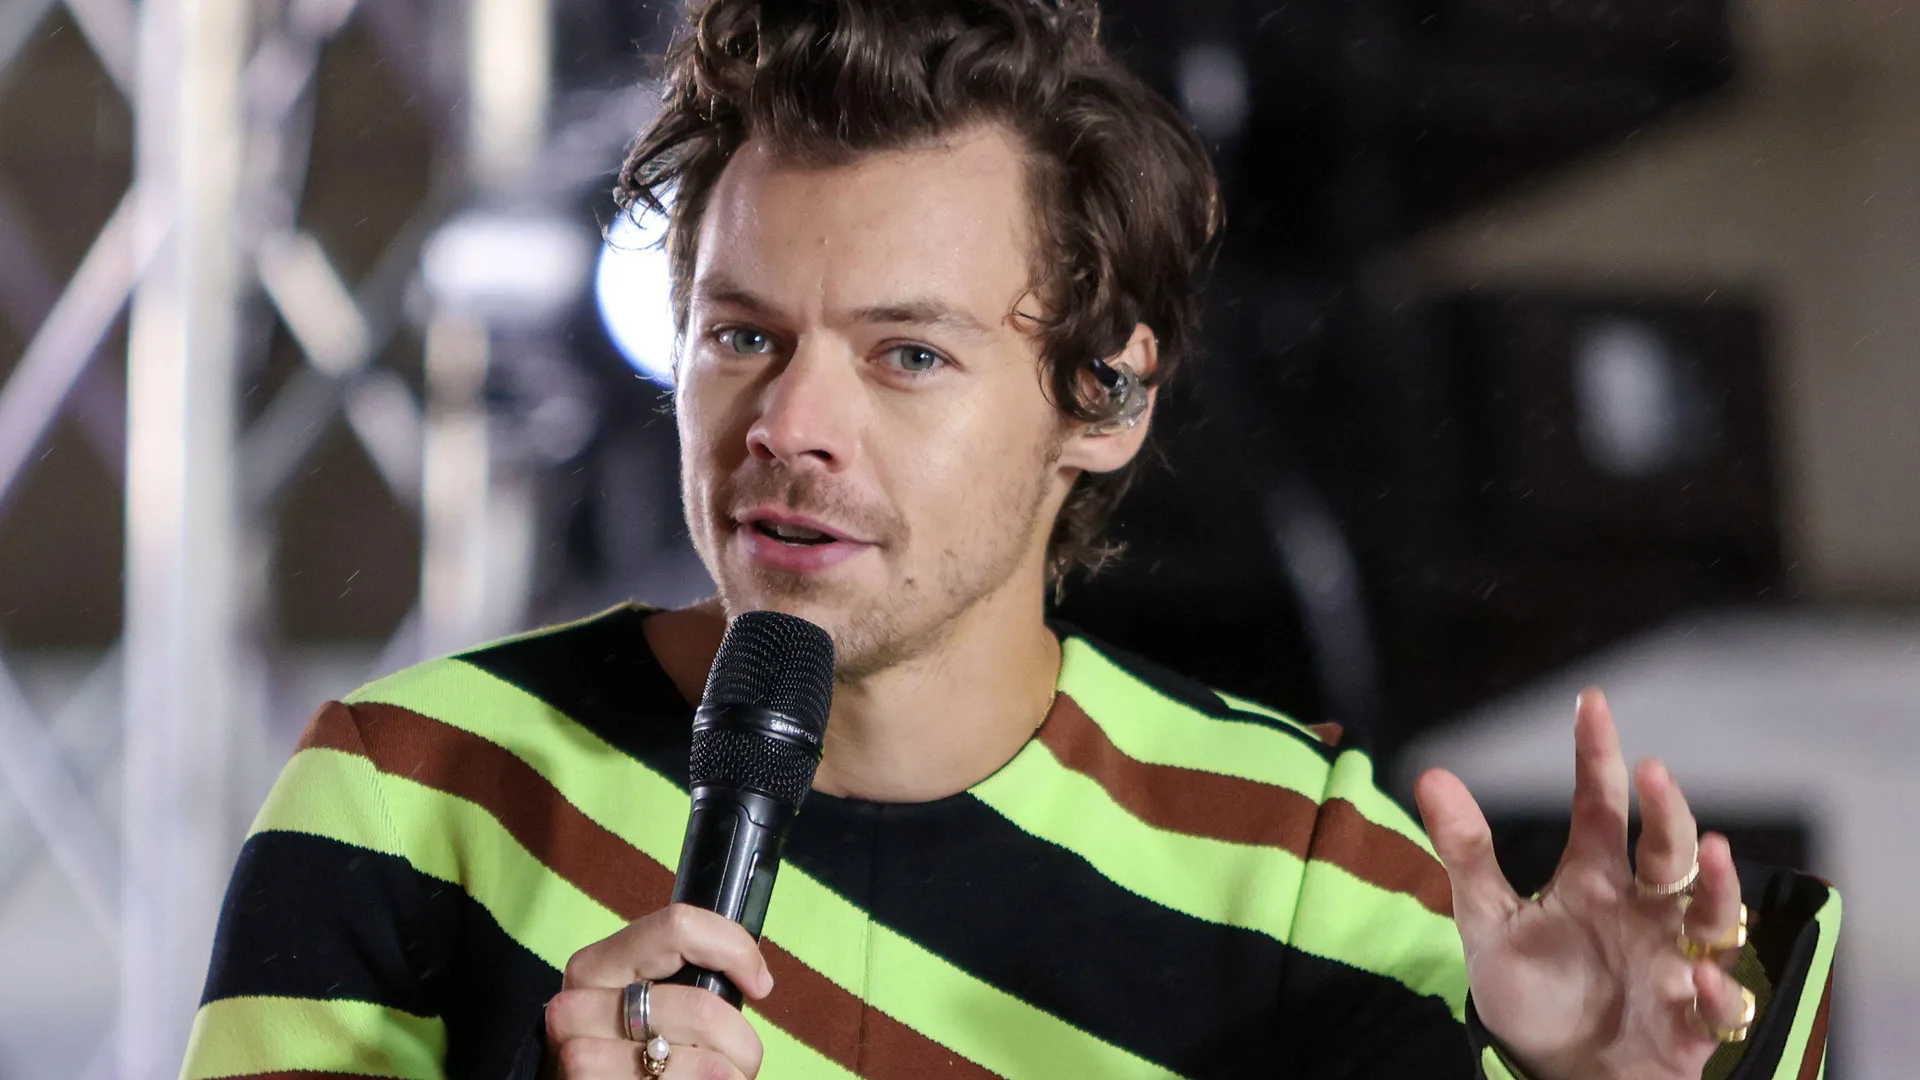 A photograph of singer Harry Styles holding a mic wearing a green and black striped shirt